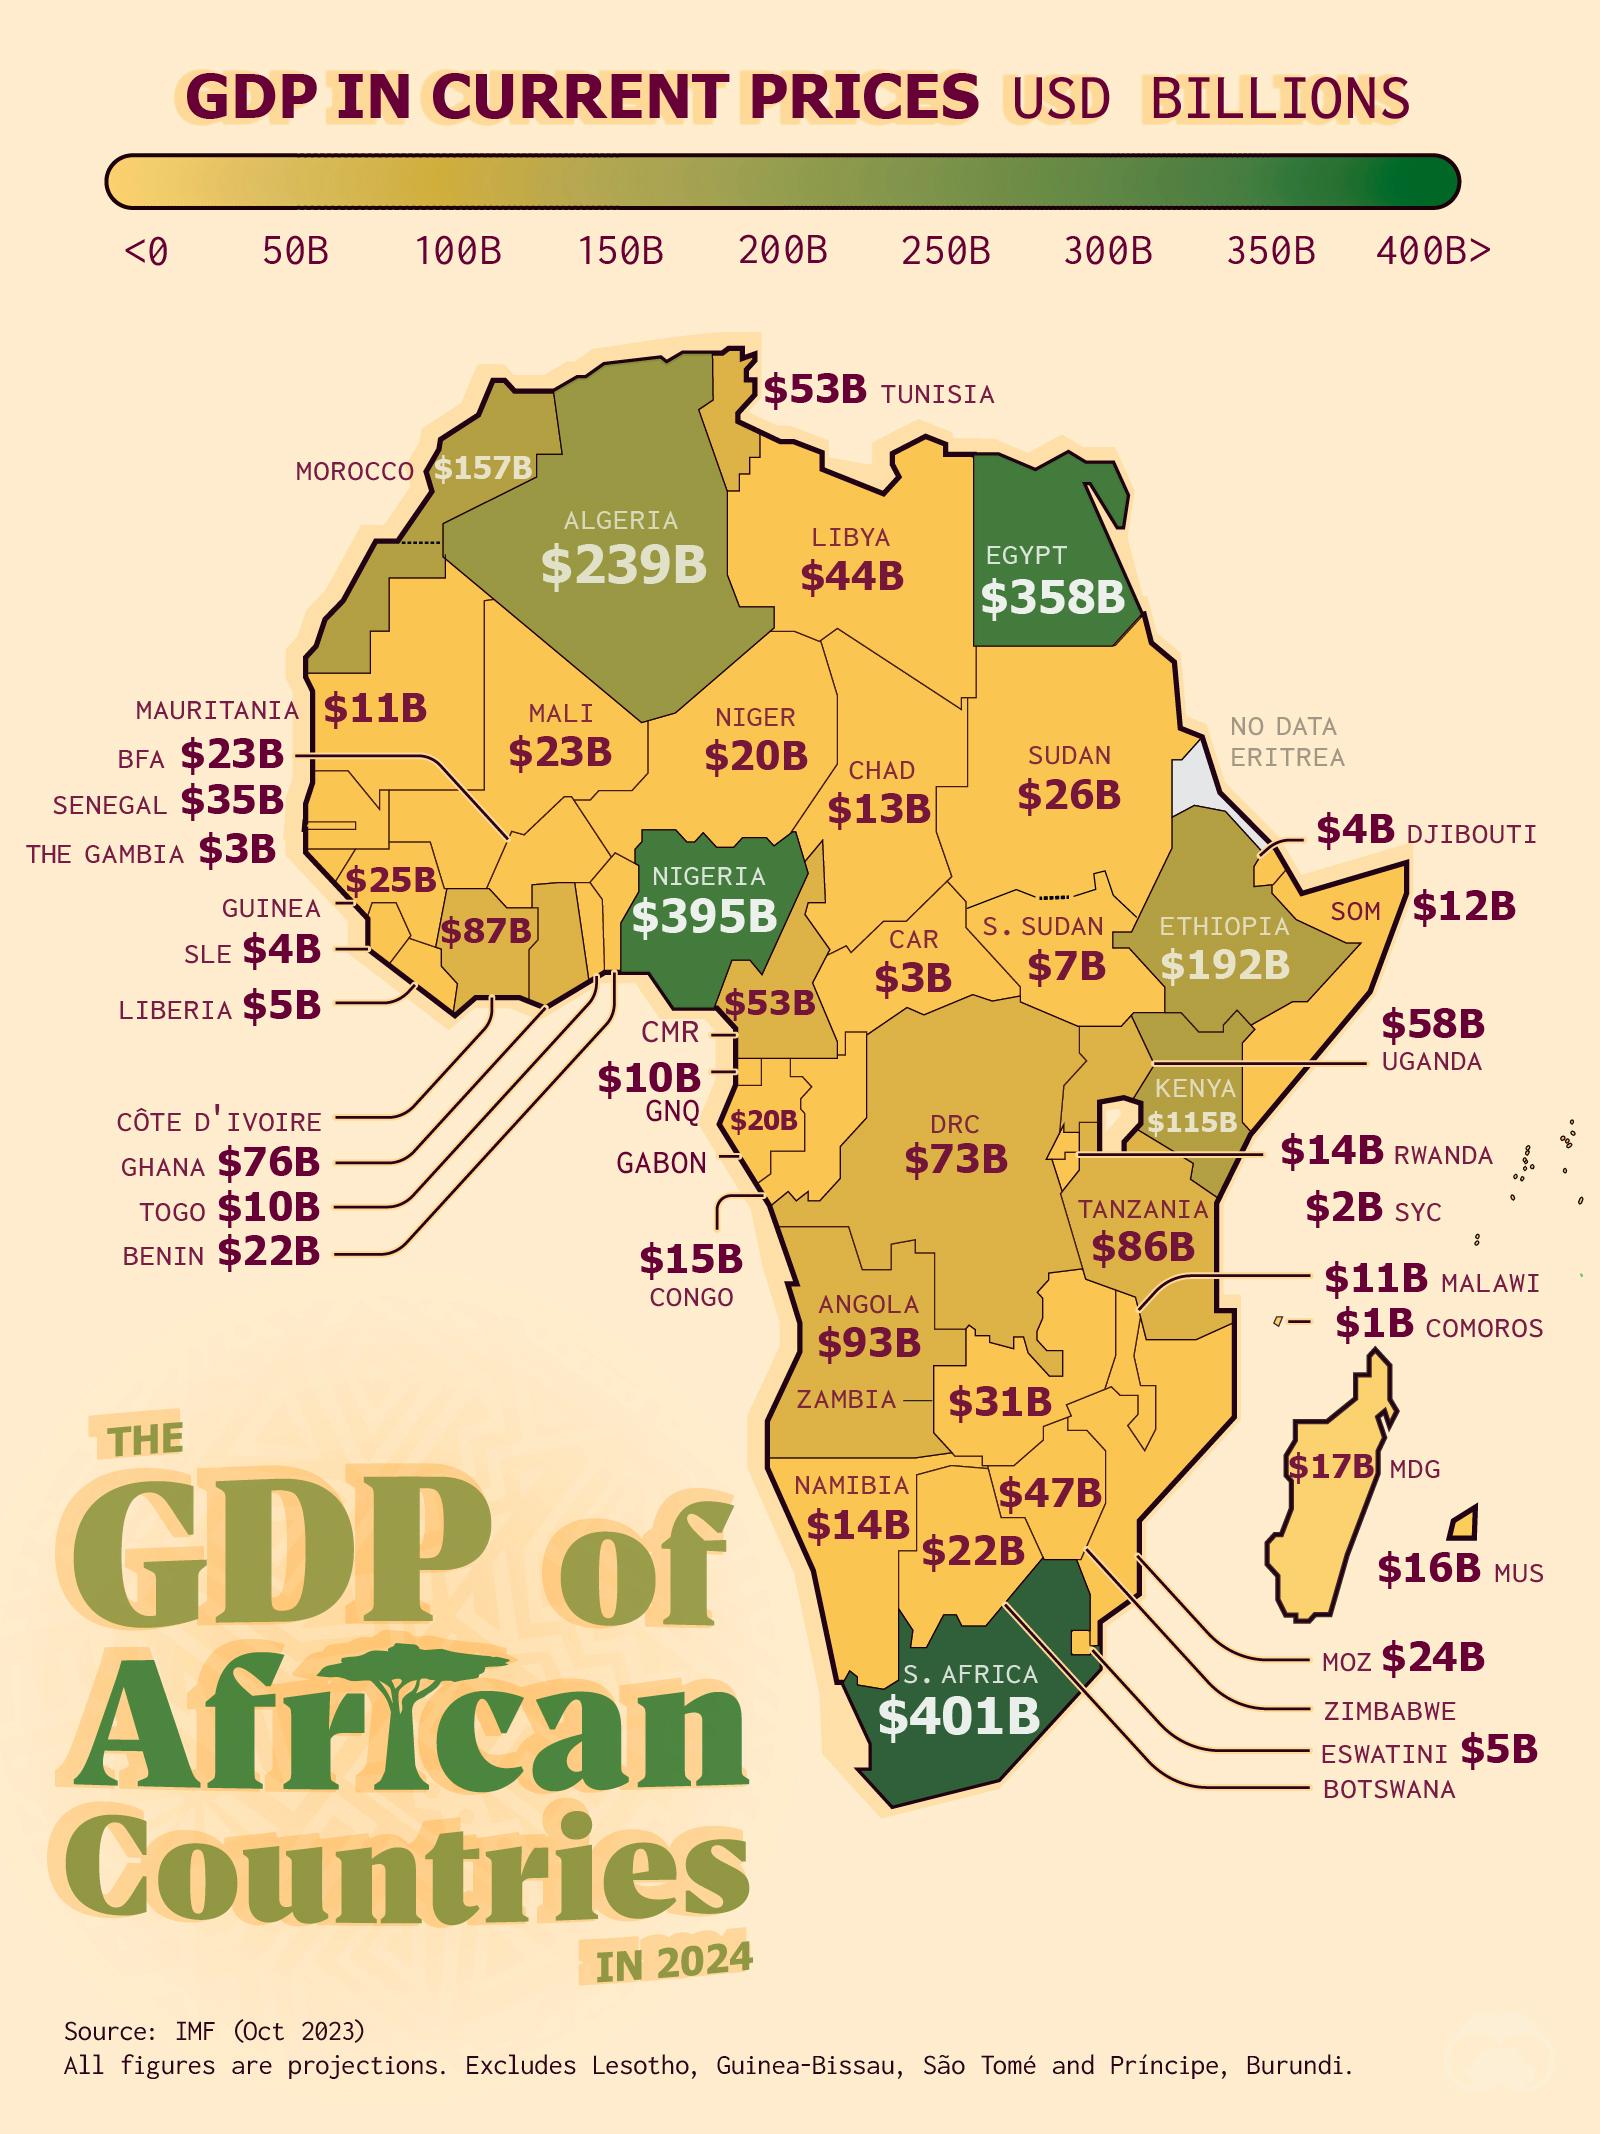 Visualizing the GDP of African Countries